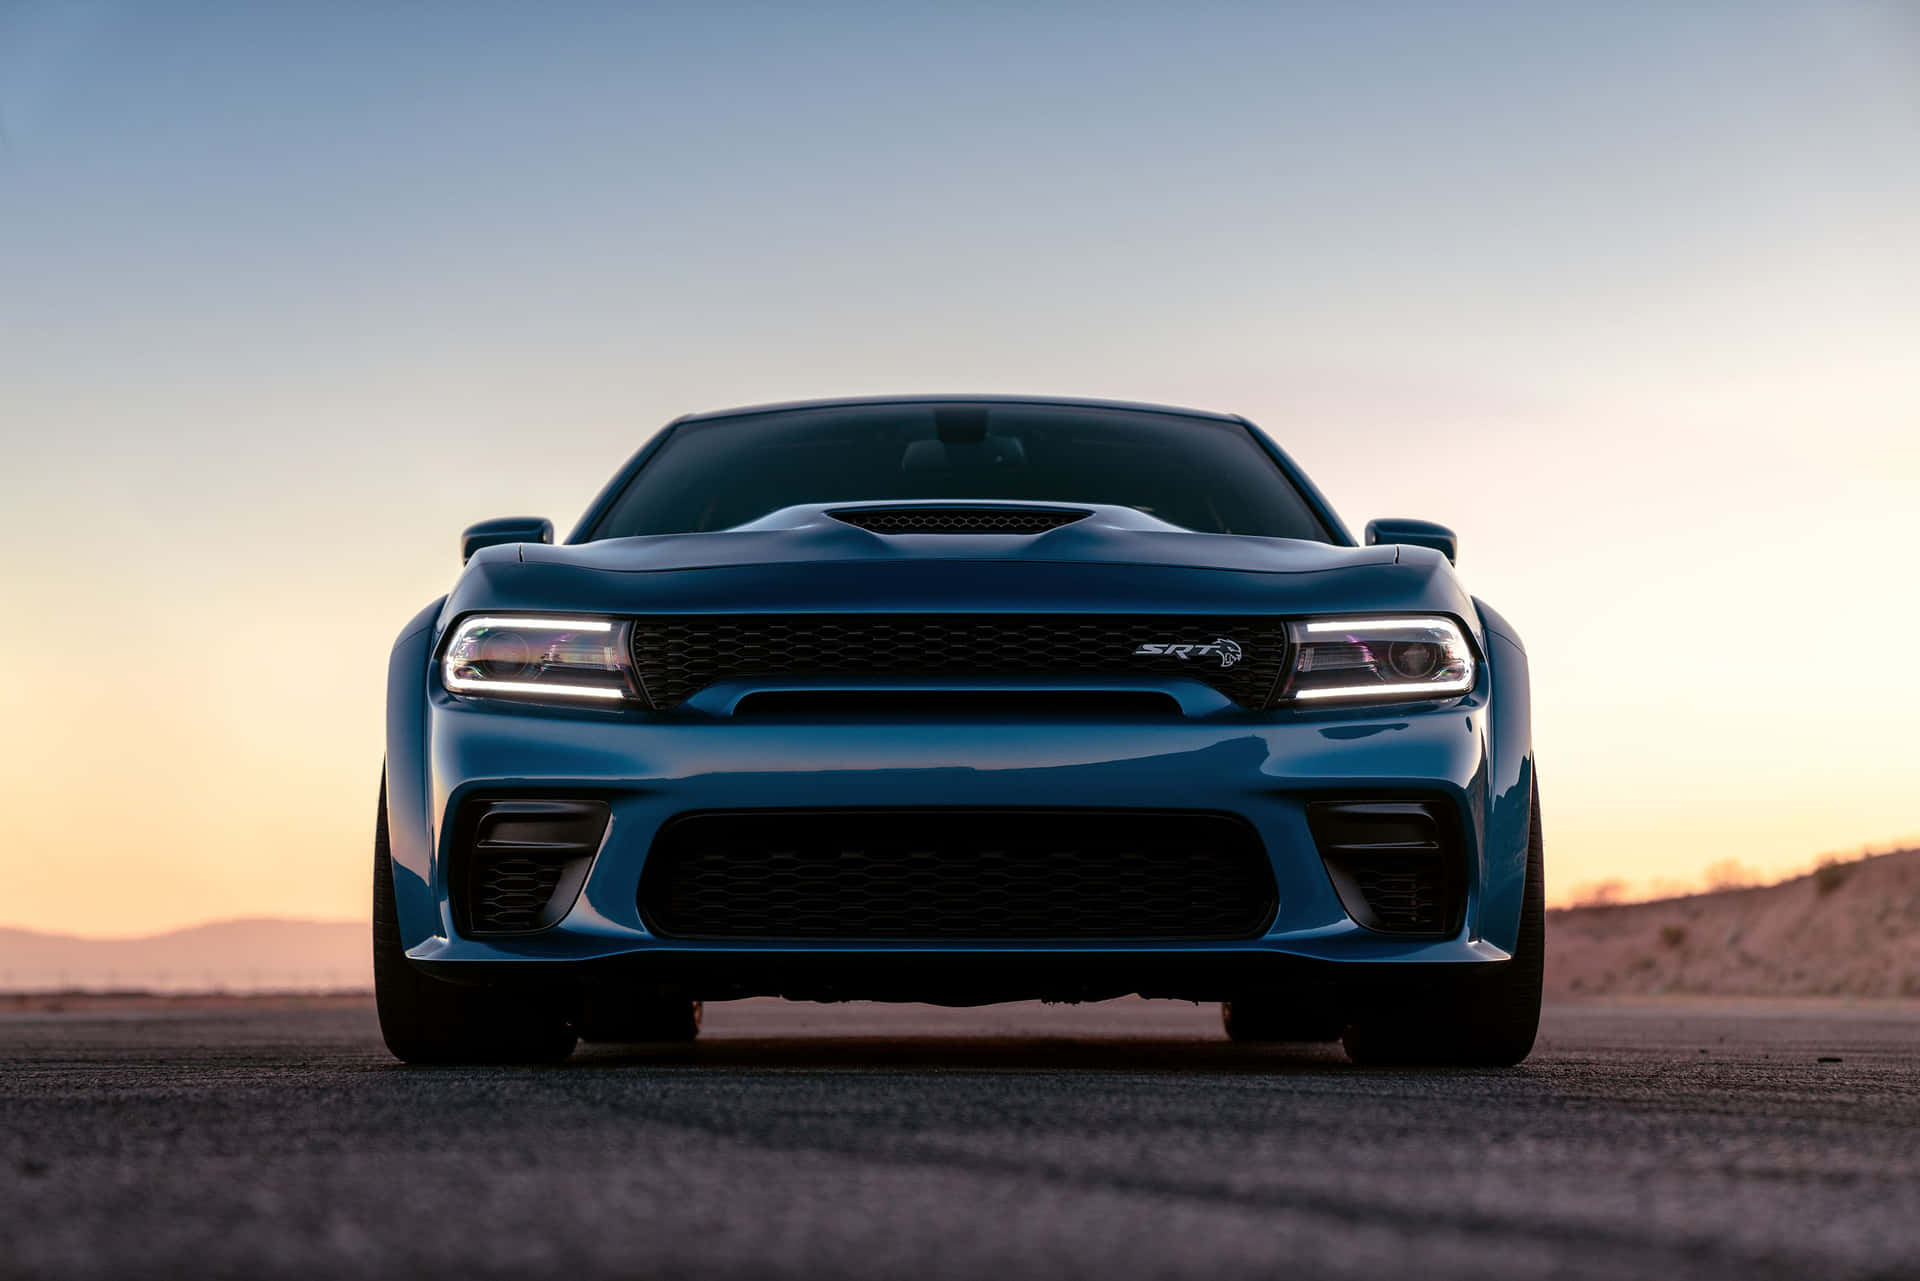 Powerful Dodge Charger cruising down the highway Wallpaper